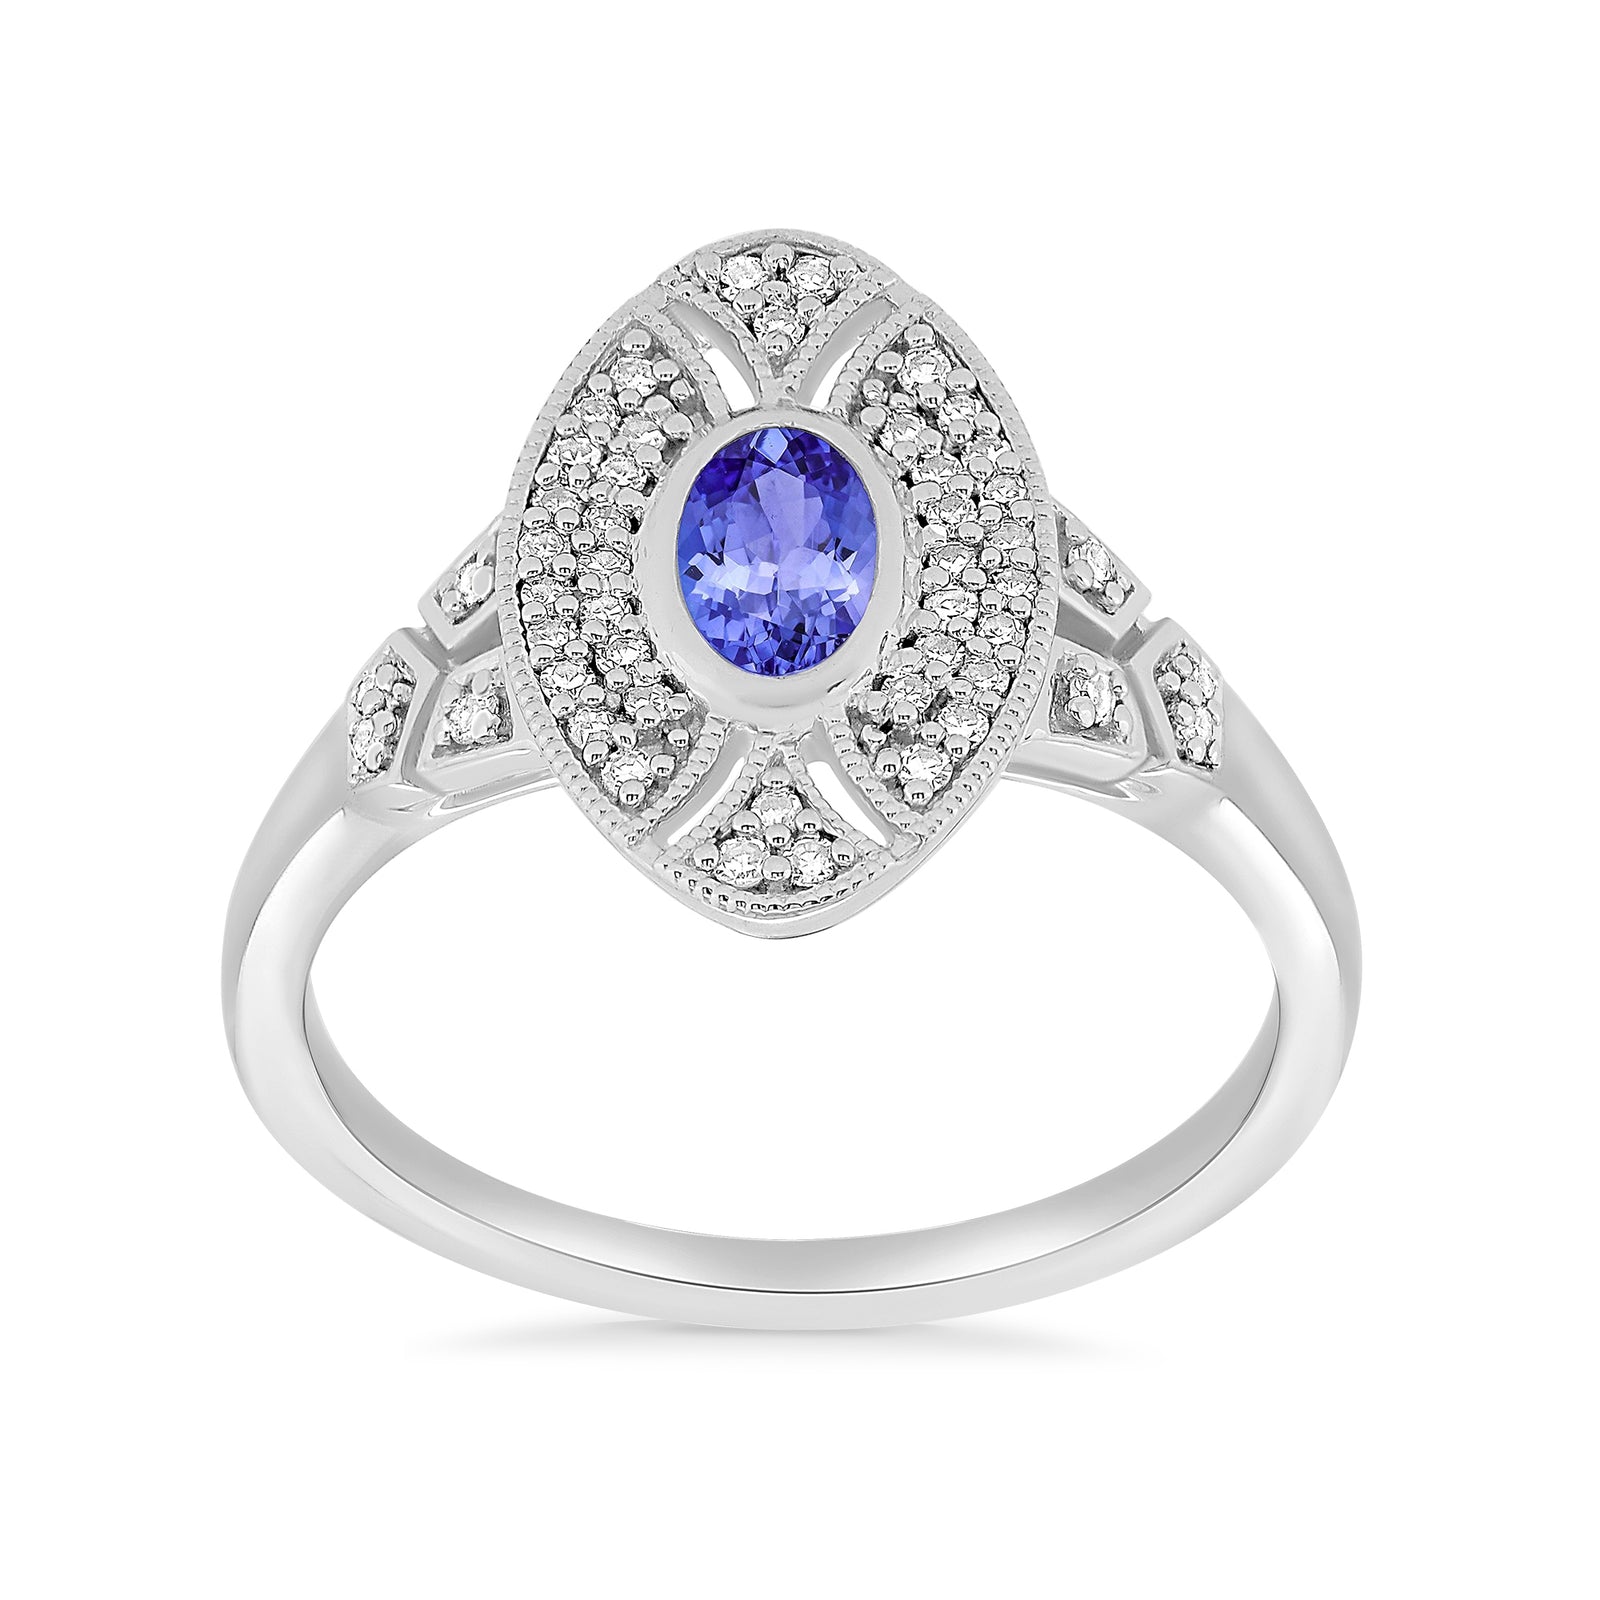 9ct white gold 6x4mm oval tanzanite & antique style diamond cluster ring 0.18ct